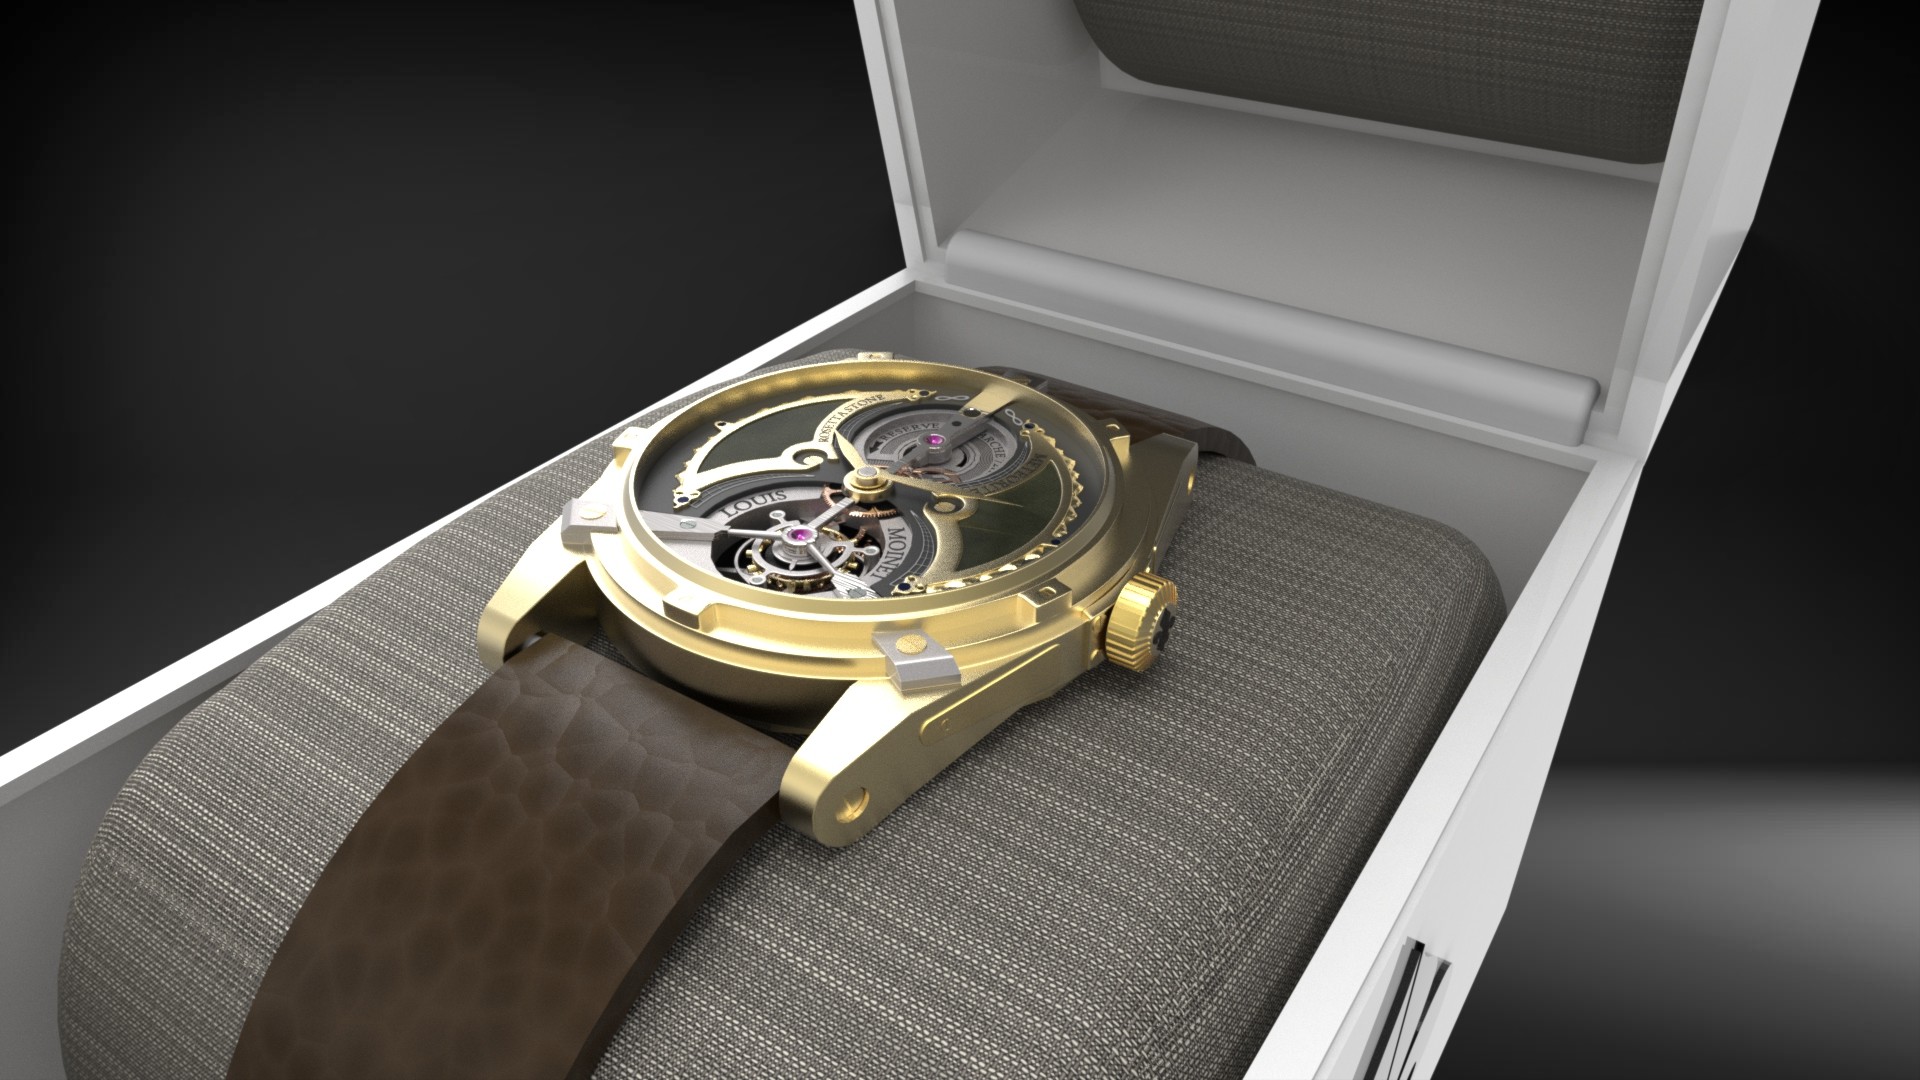 The Most Expensive Watches In The World | Esquire